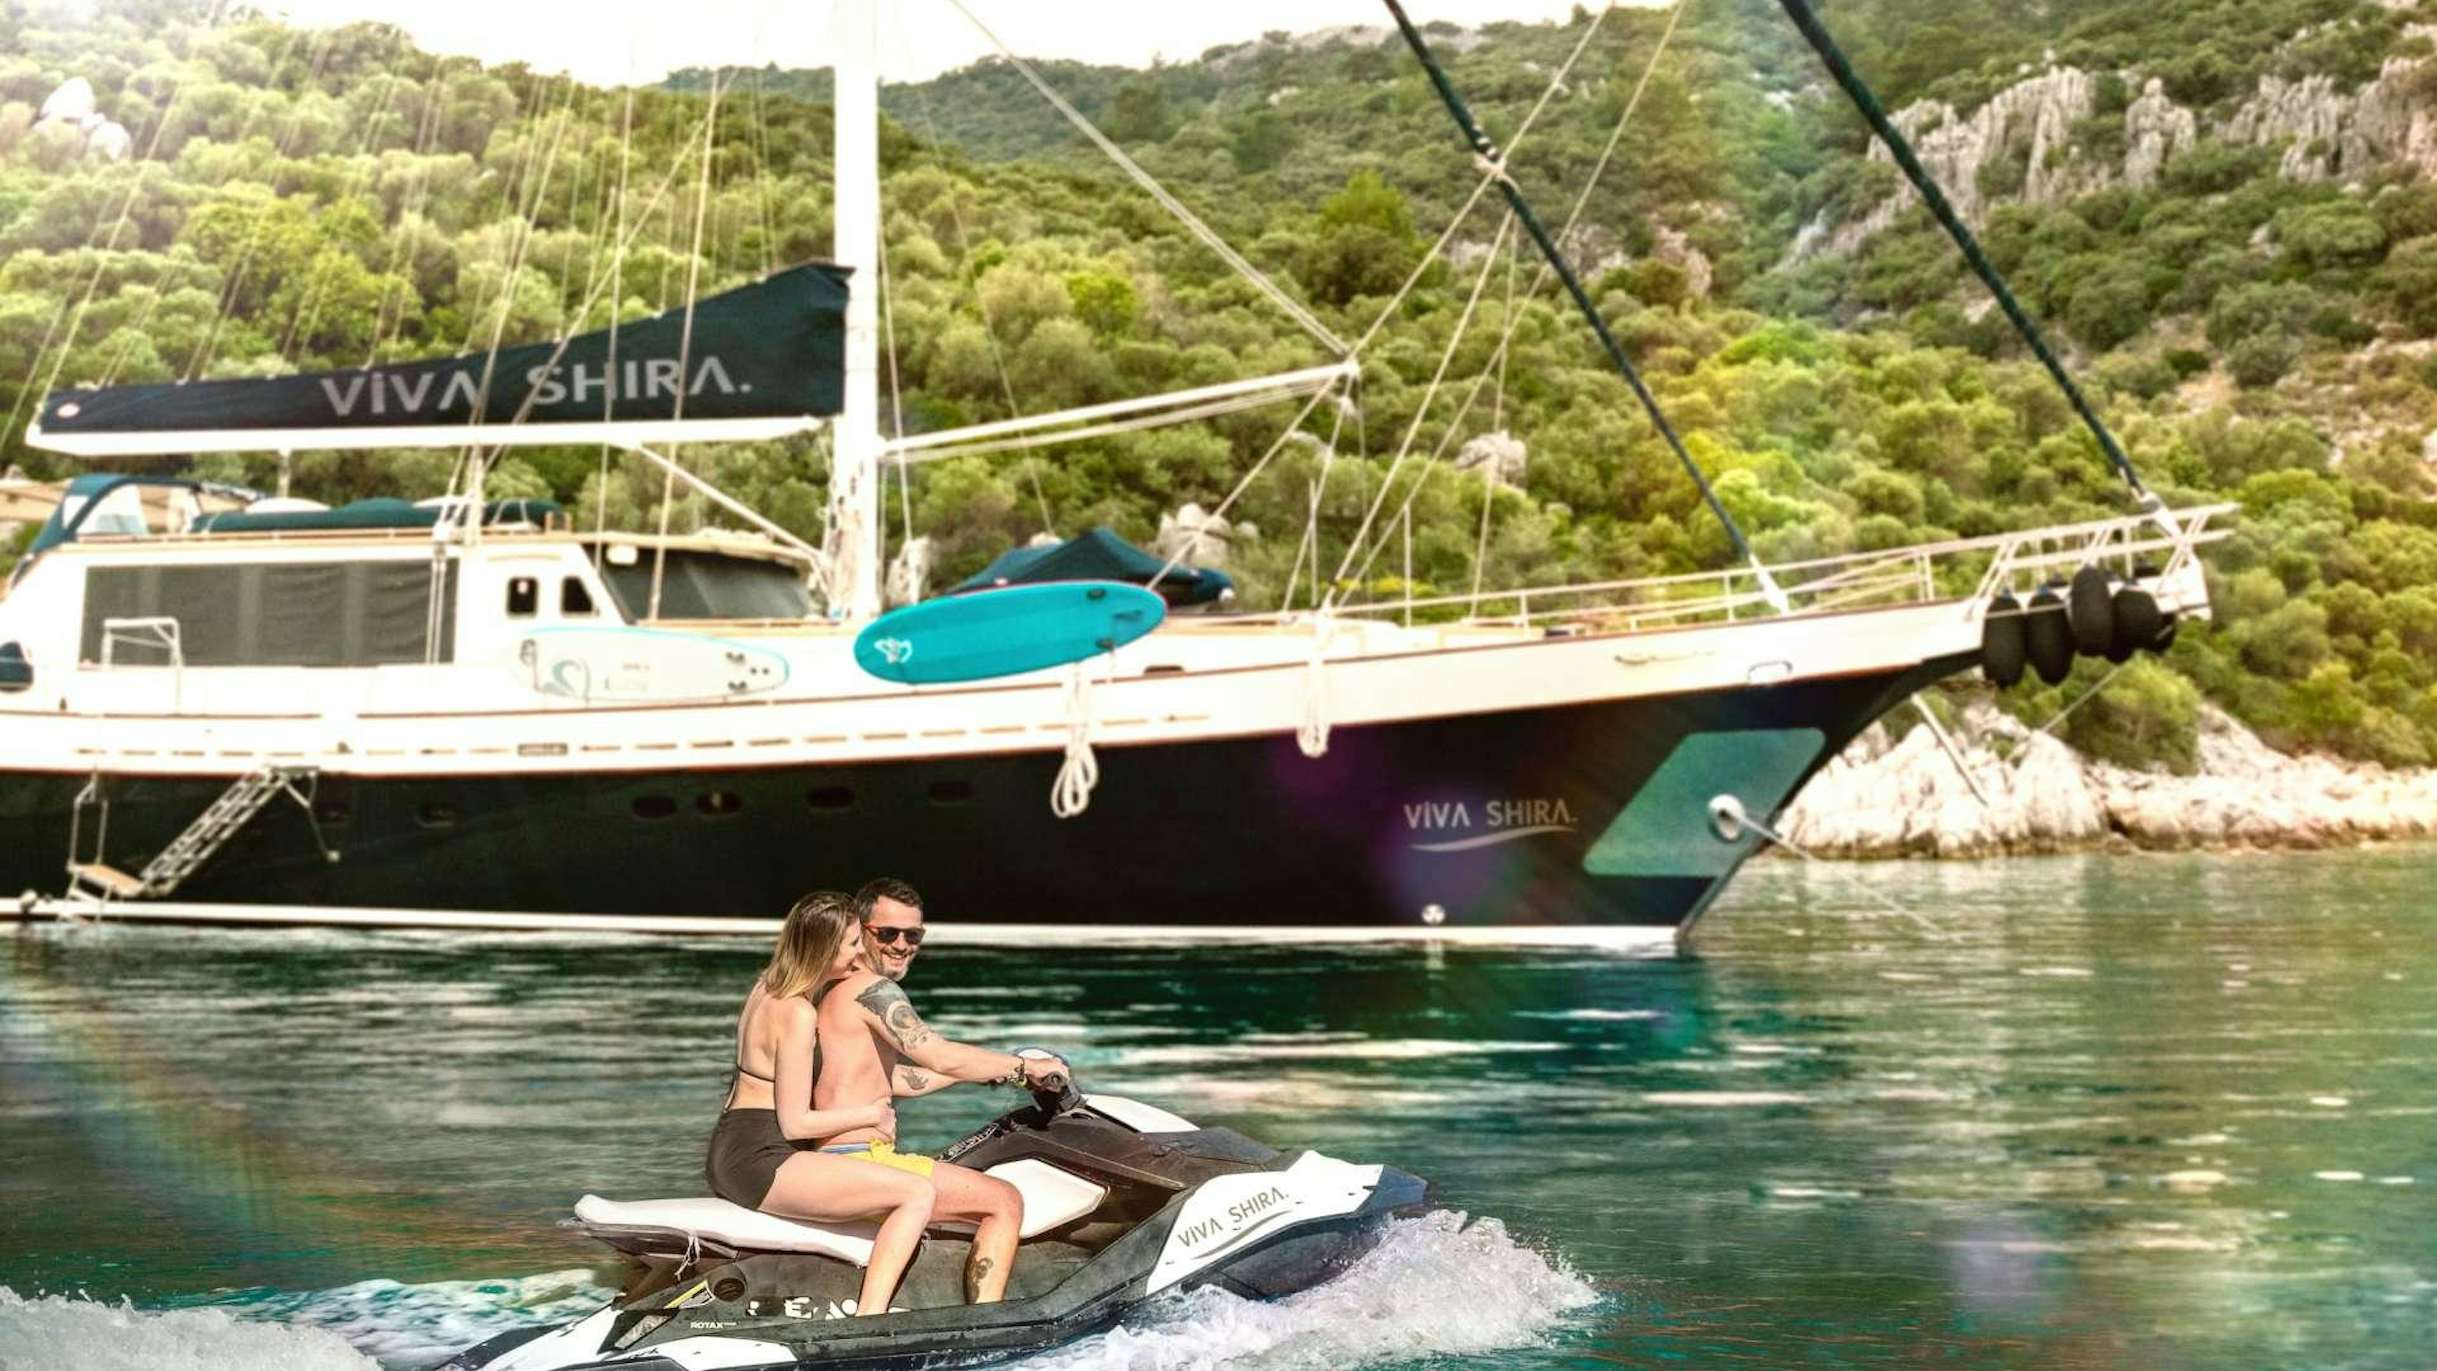 Watch Video for VIVA SHIRA Yacht for Charter